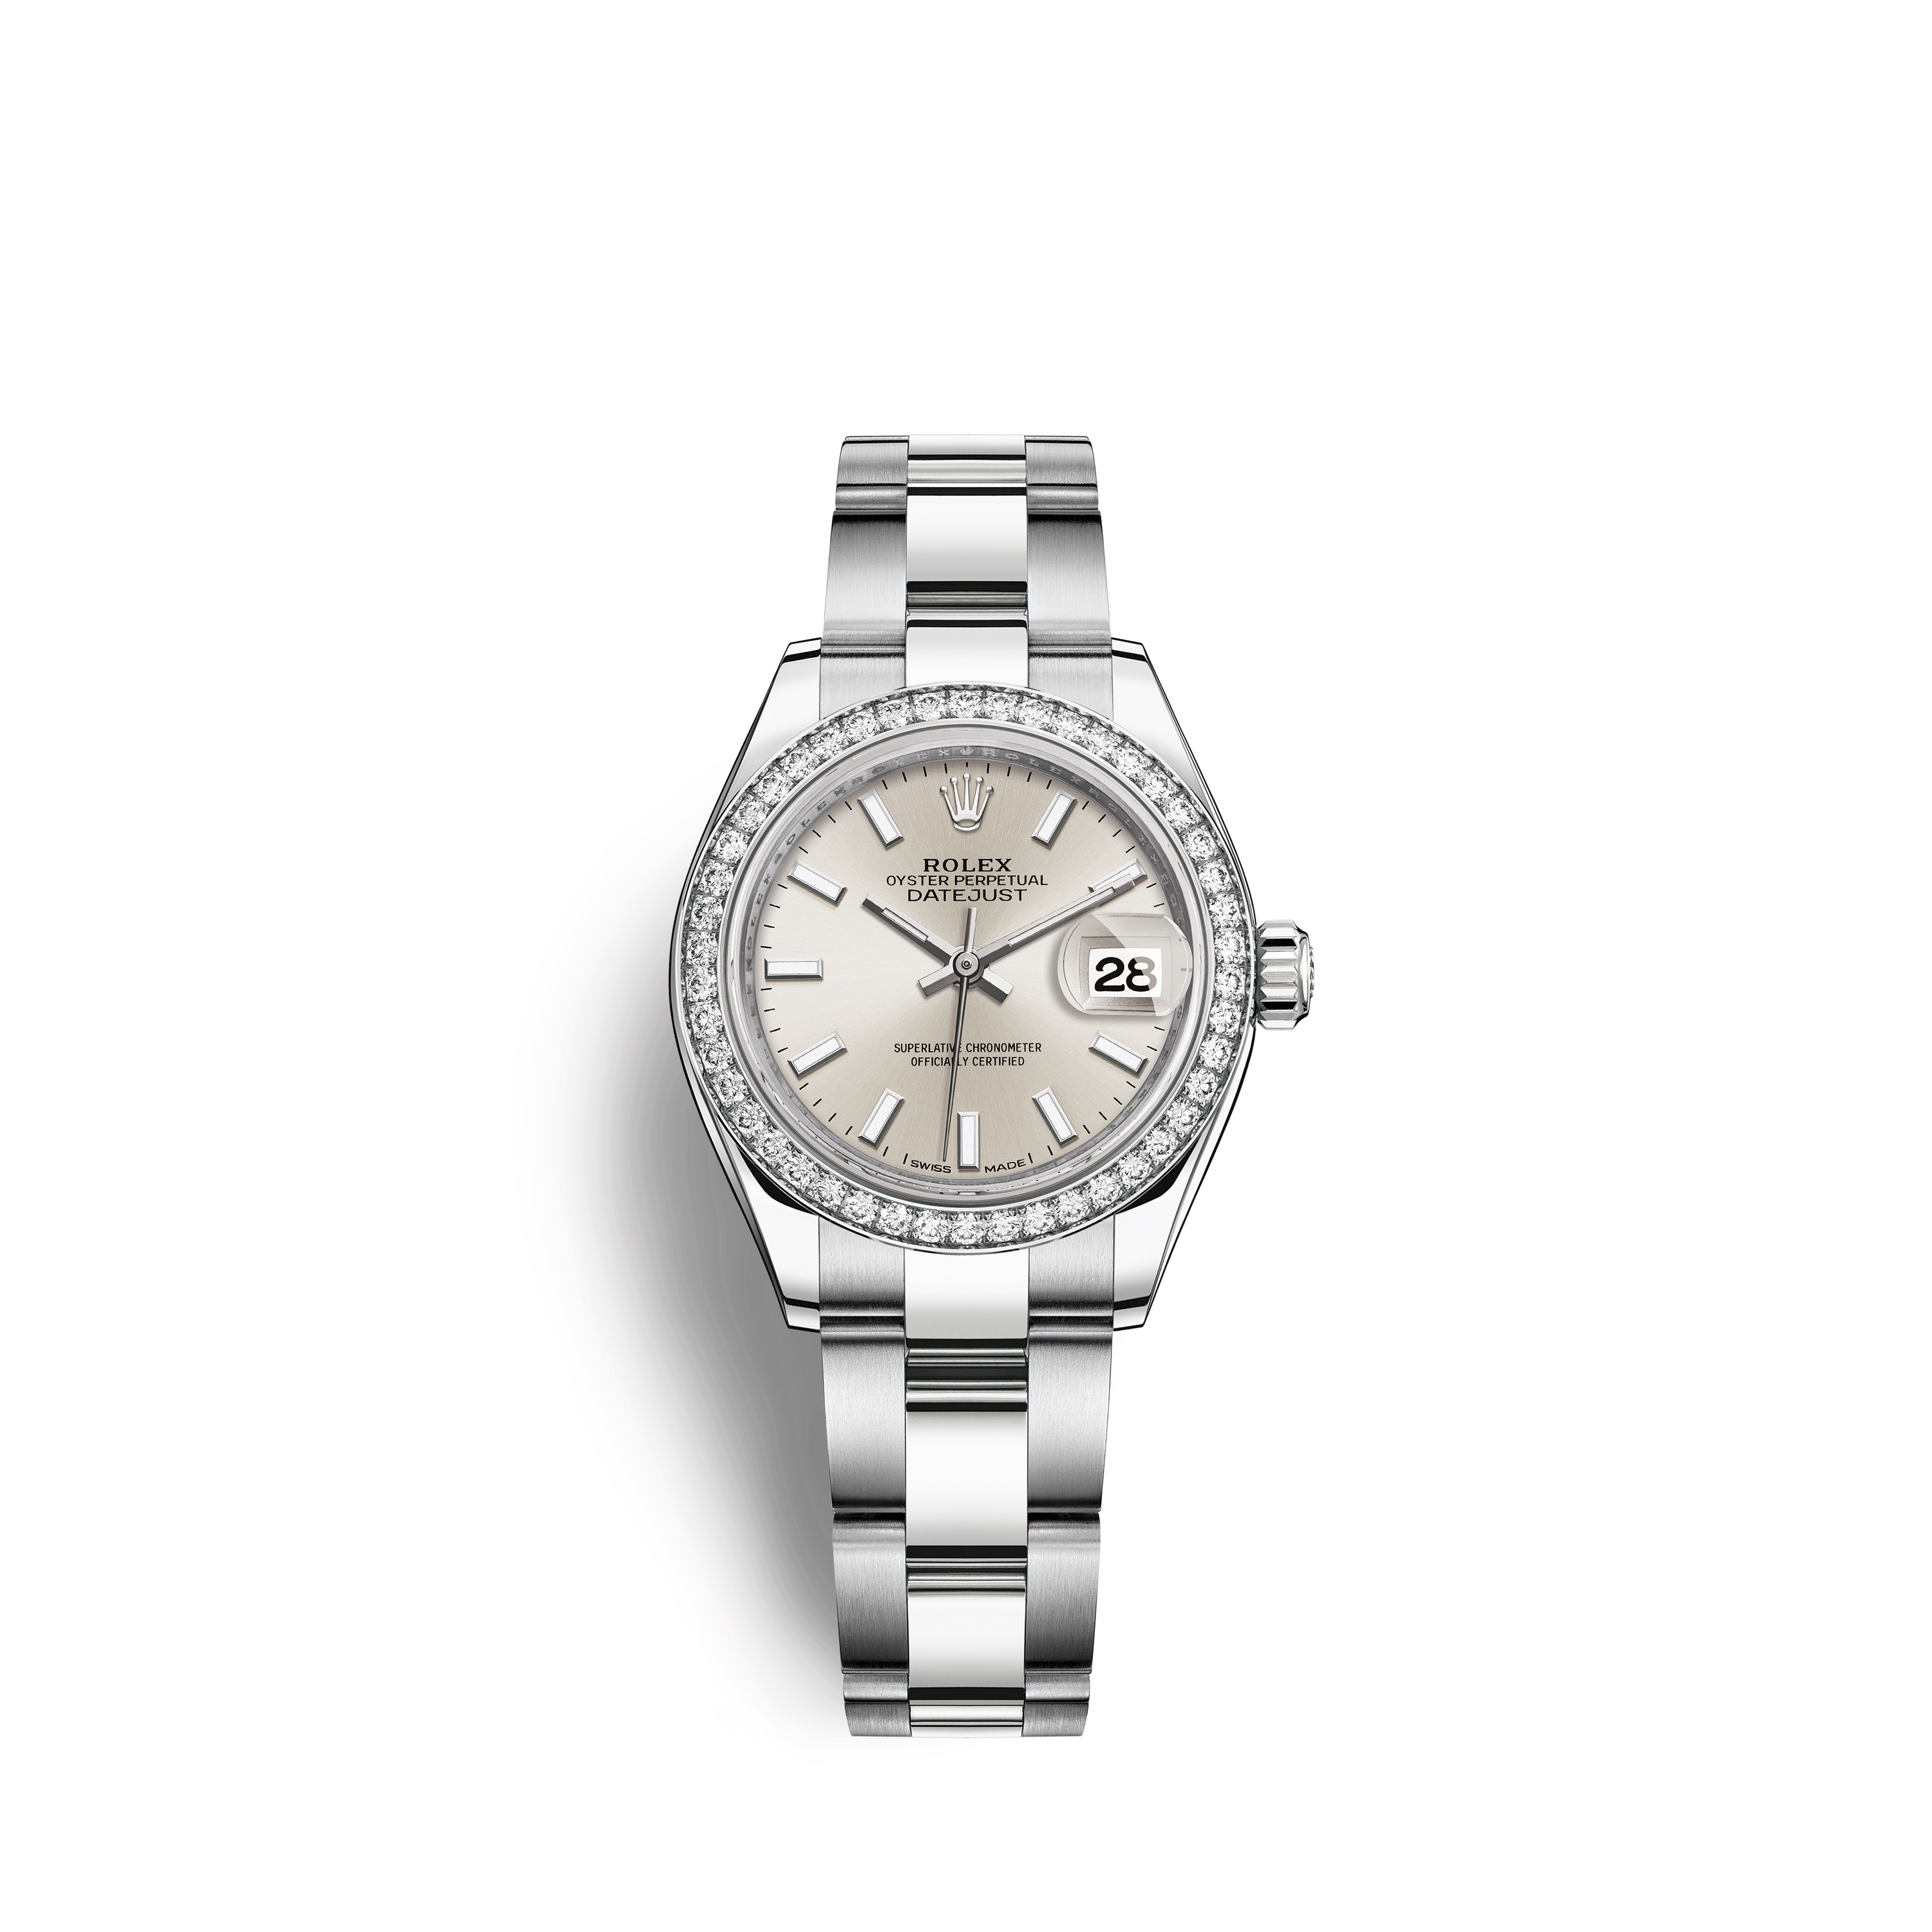 Lady-Datejust 28 279384RBR White Gold & Stainless Steel Watch (Silver)